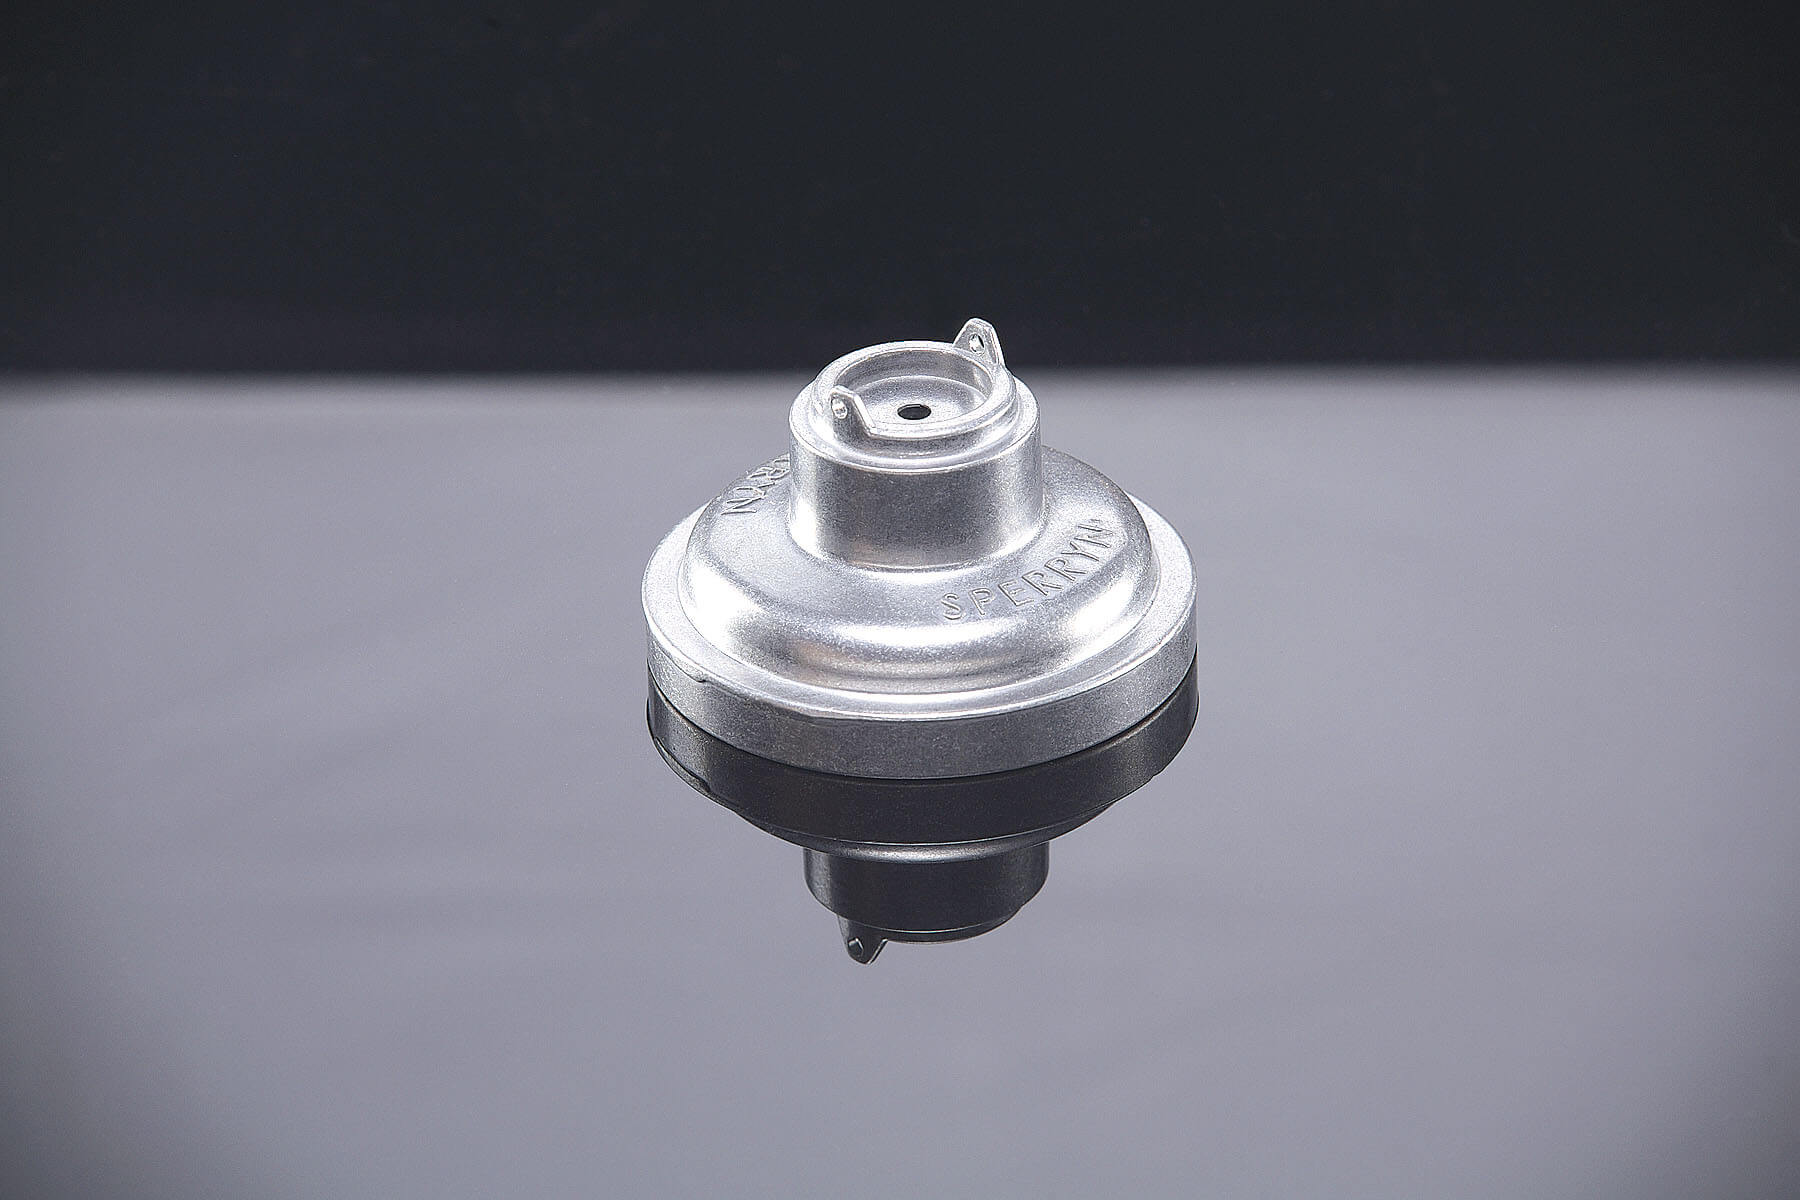 Precision Machined Components Suppliers